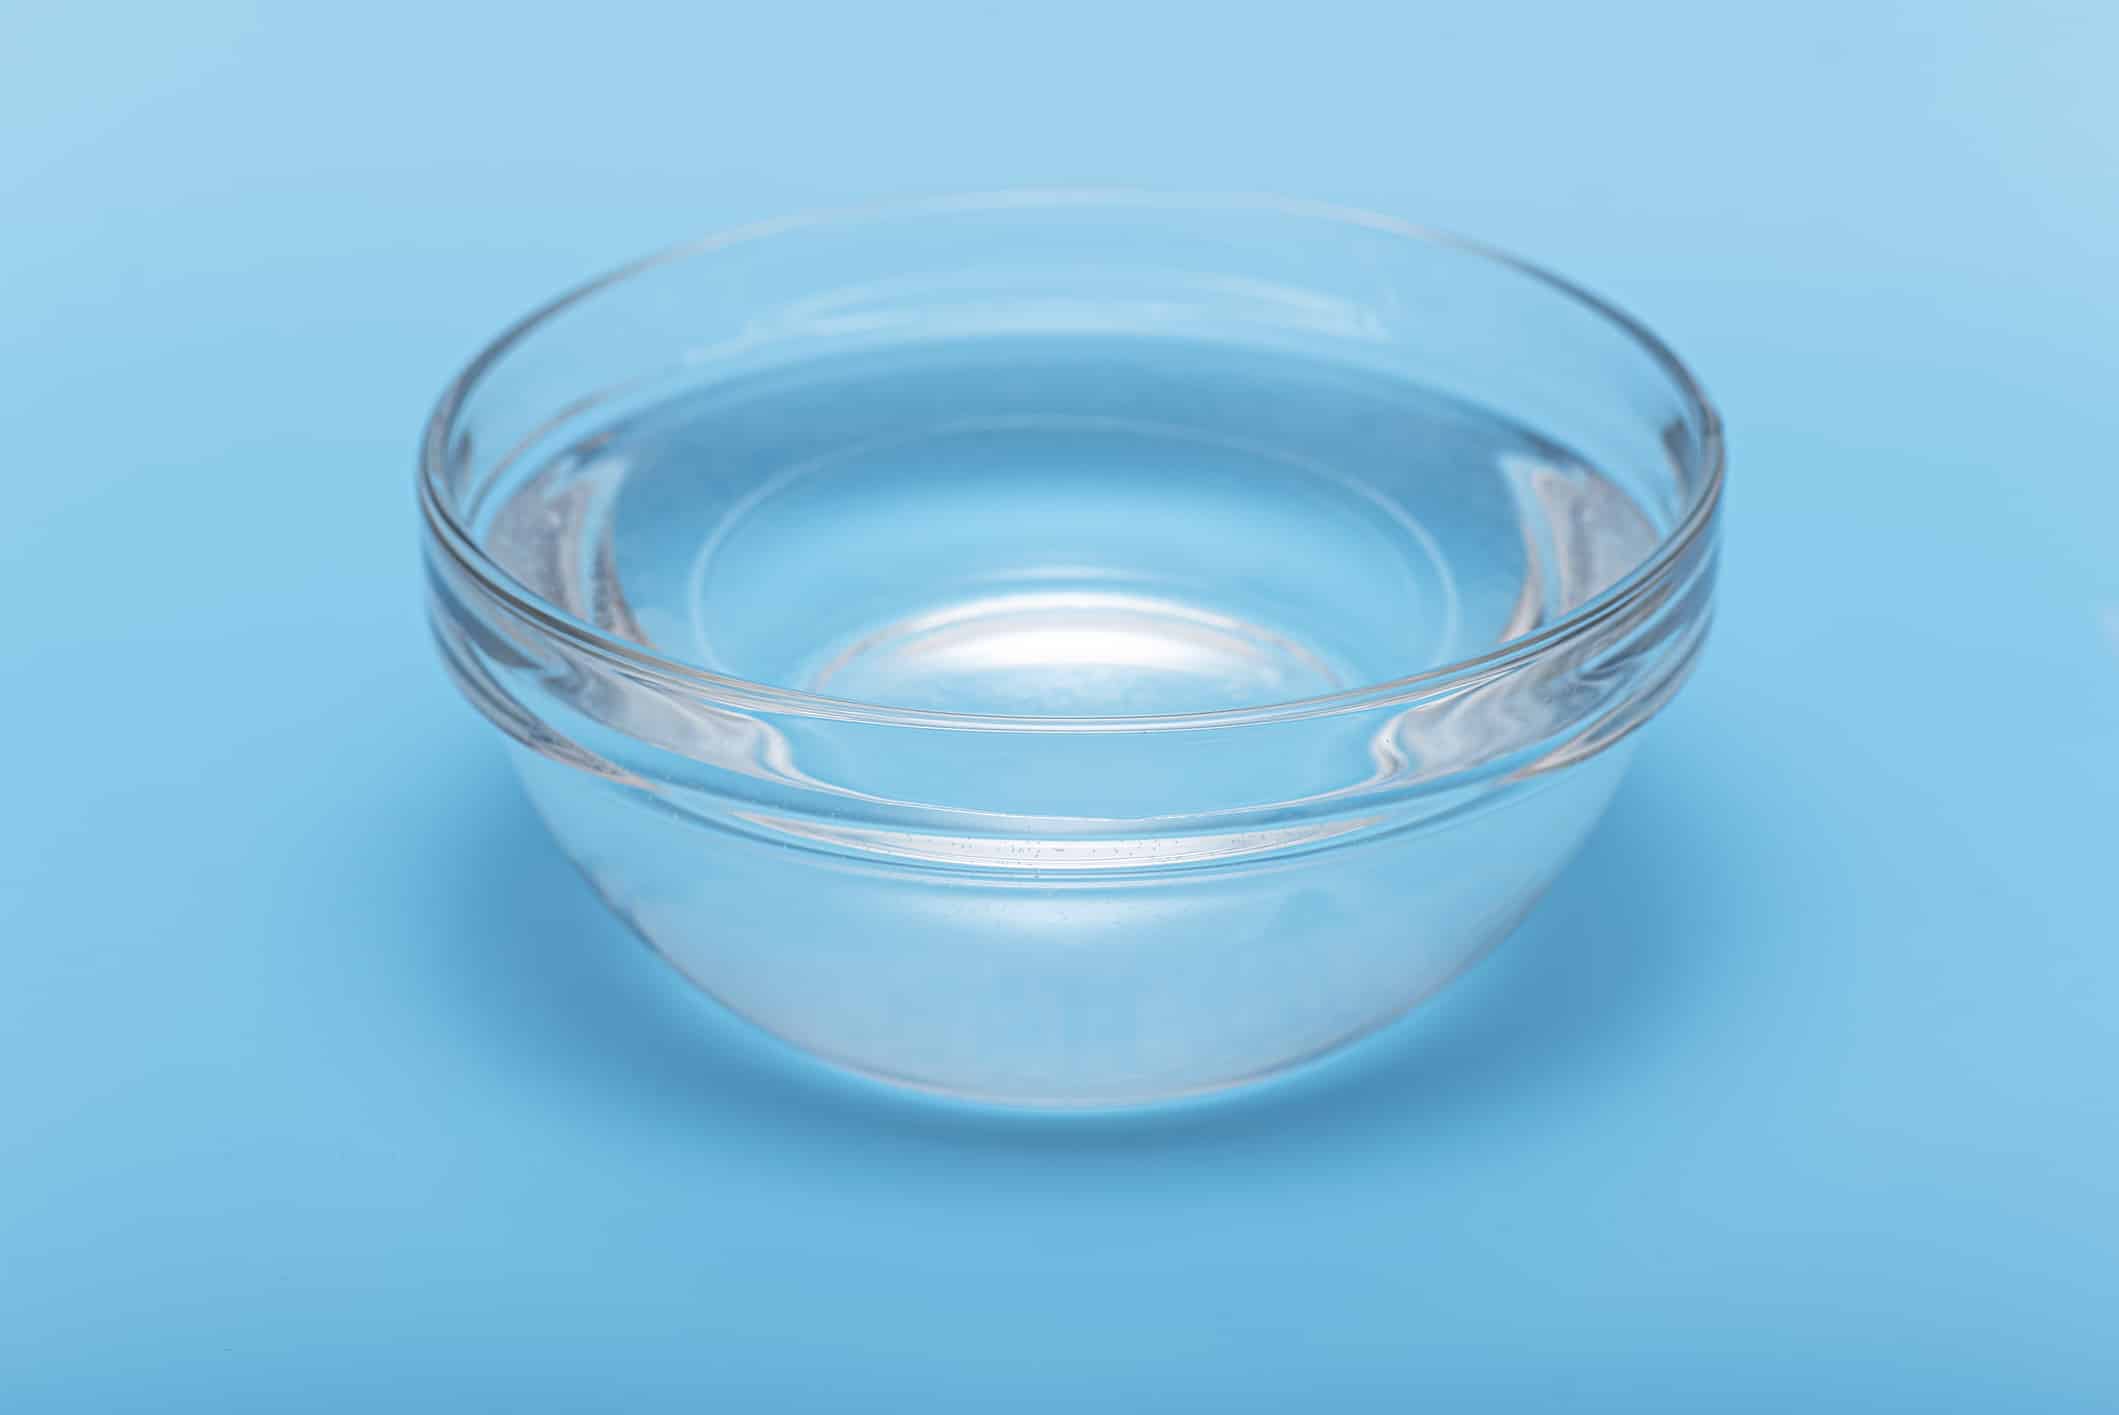 Pure, clear drink water in glass bowl or plate on blue background